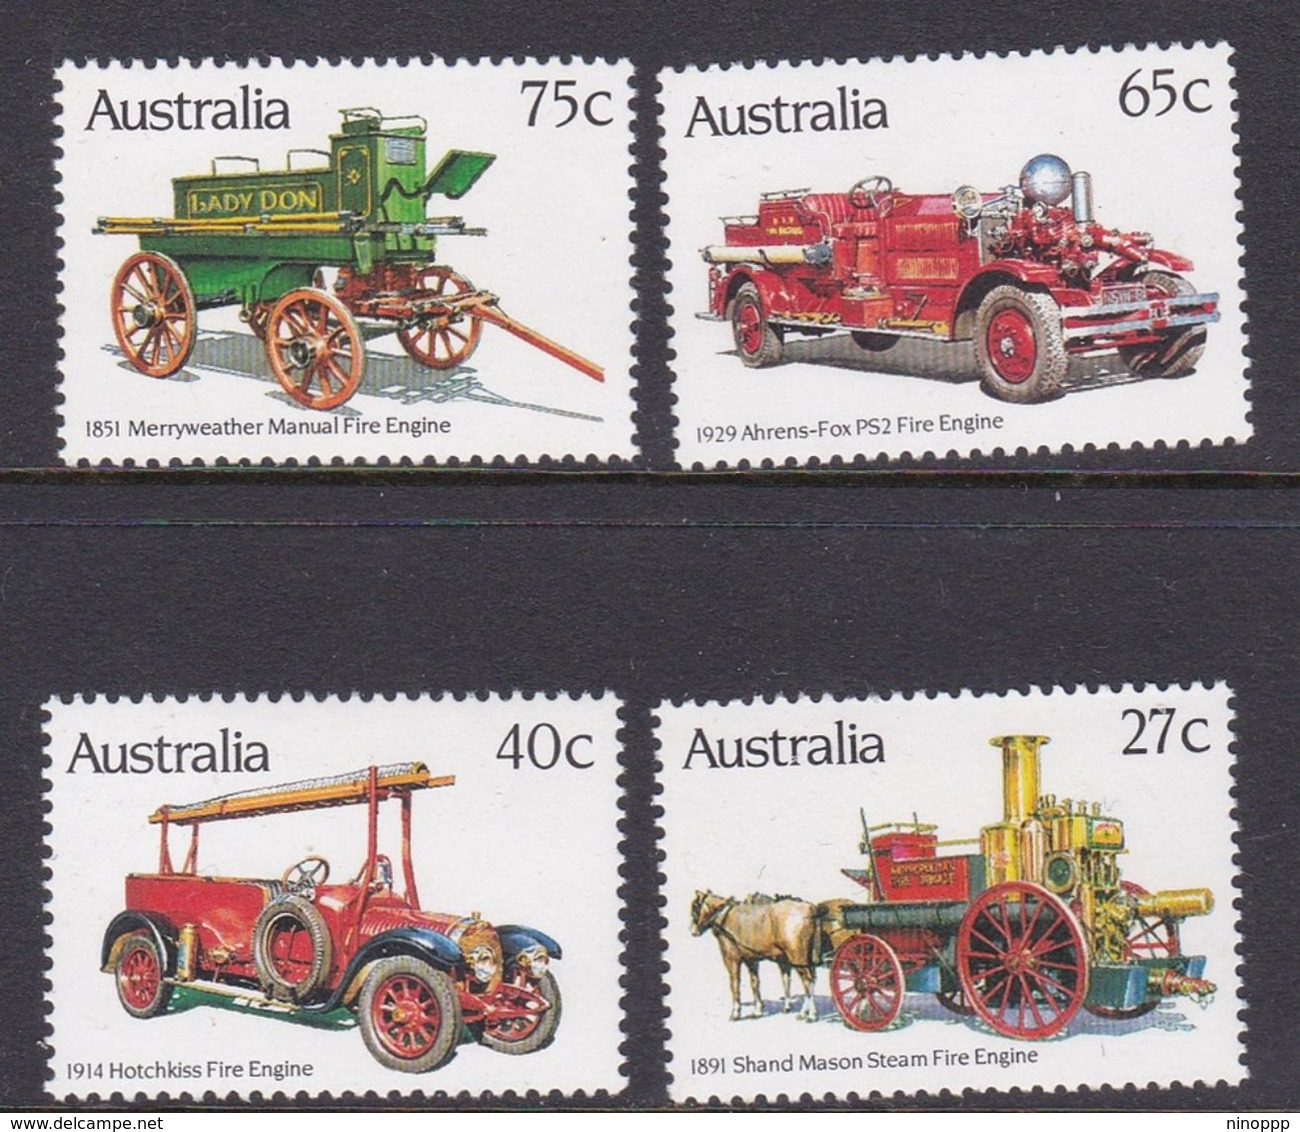 Australia ASC 869-872 1983 Historic Fire Engines, Mint Never Hinged - Mint Stamps